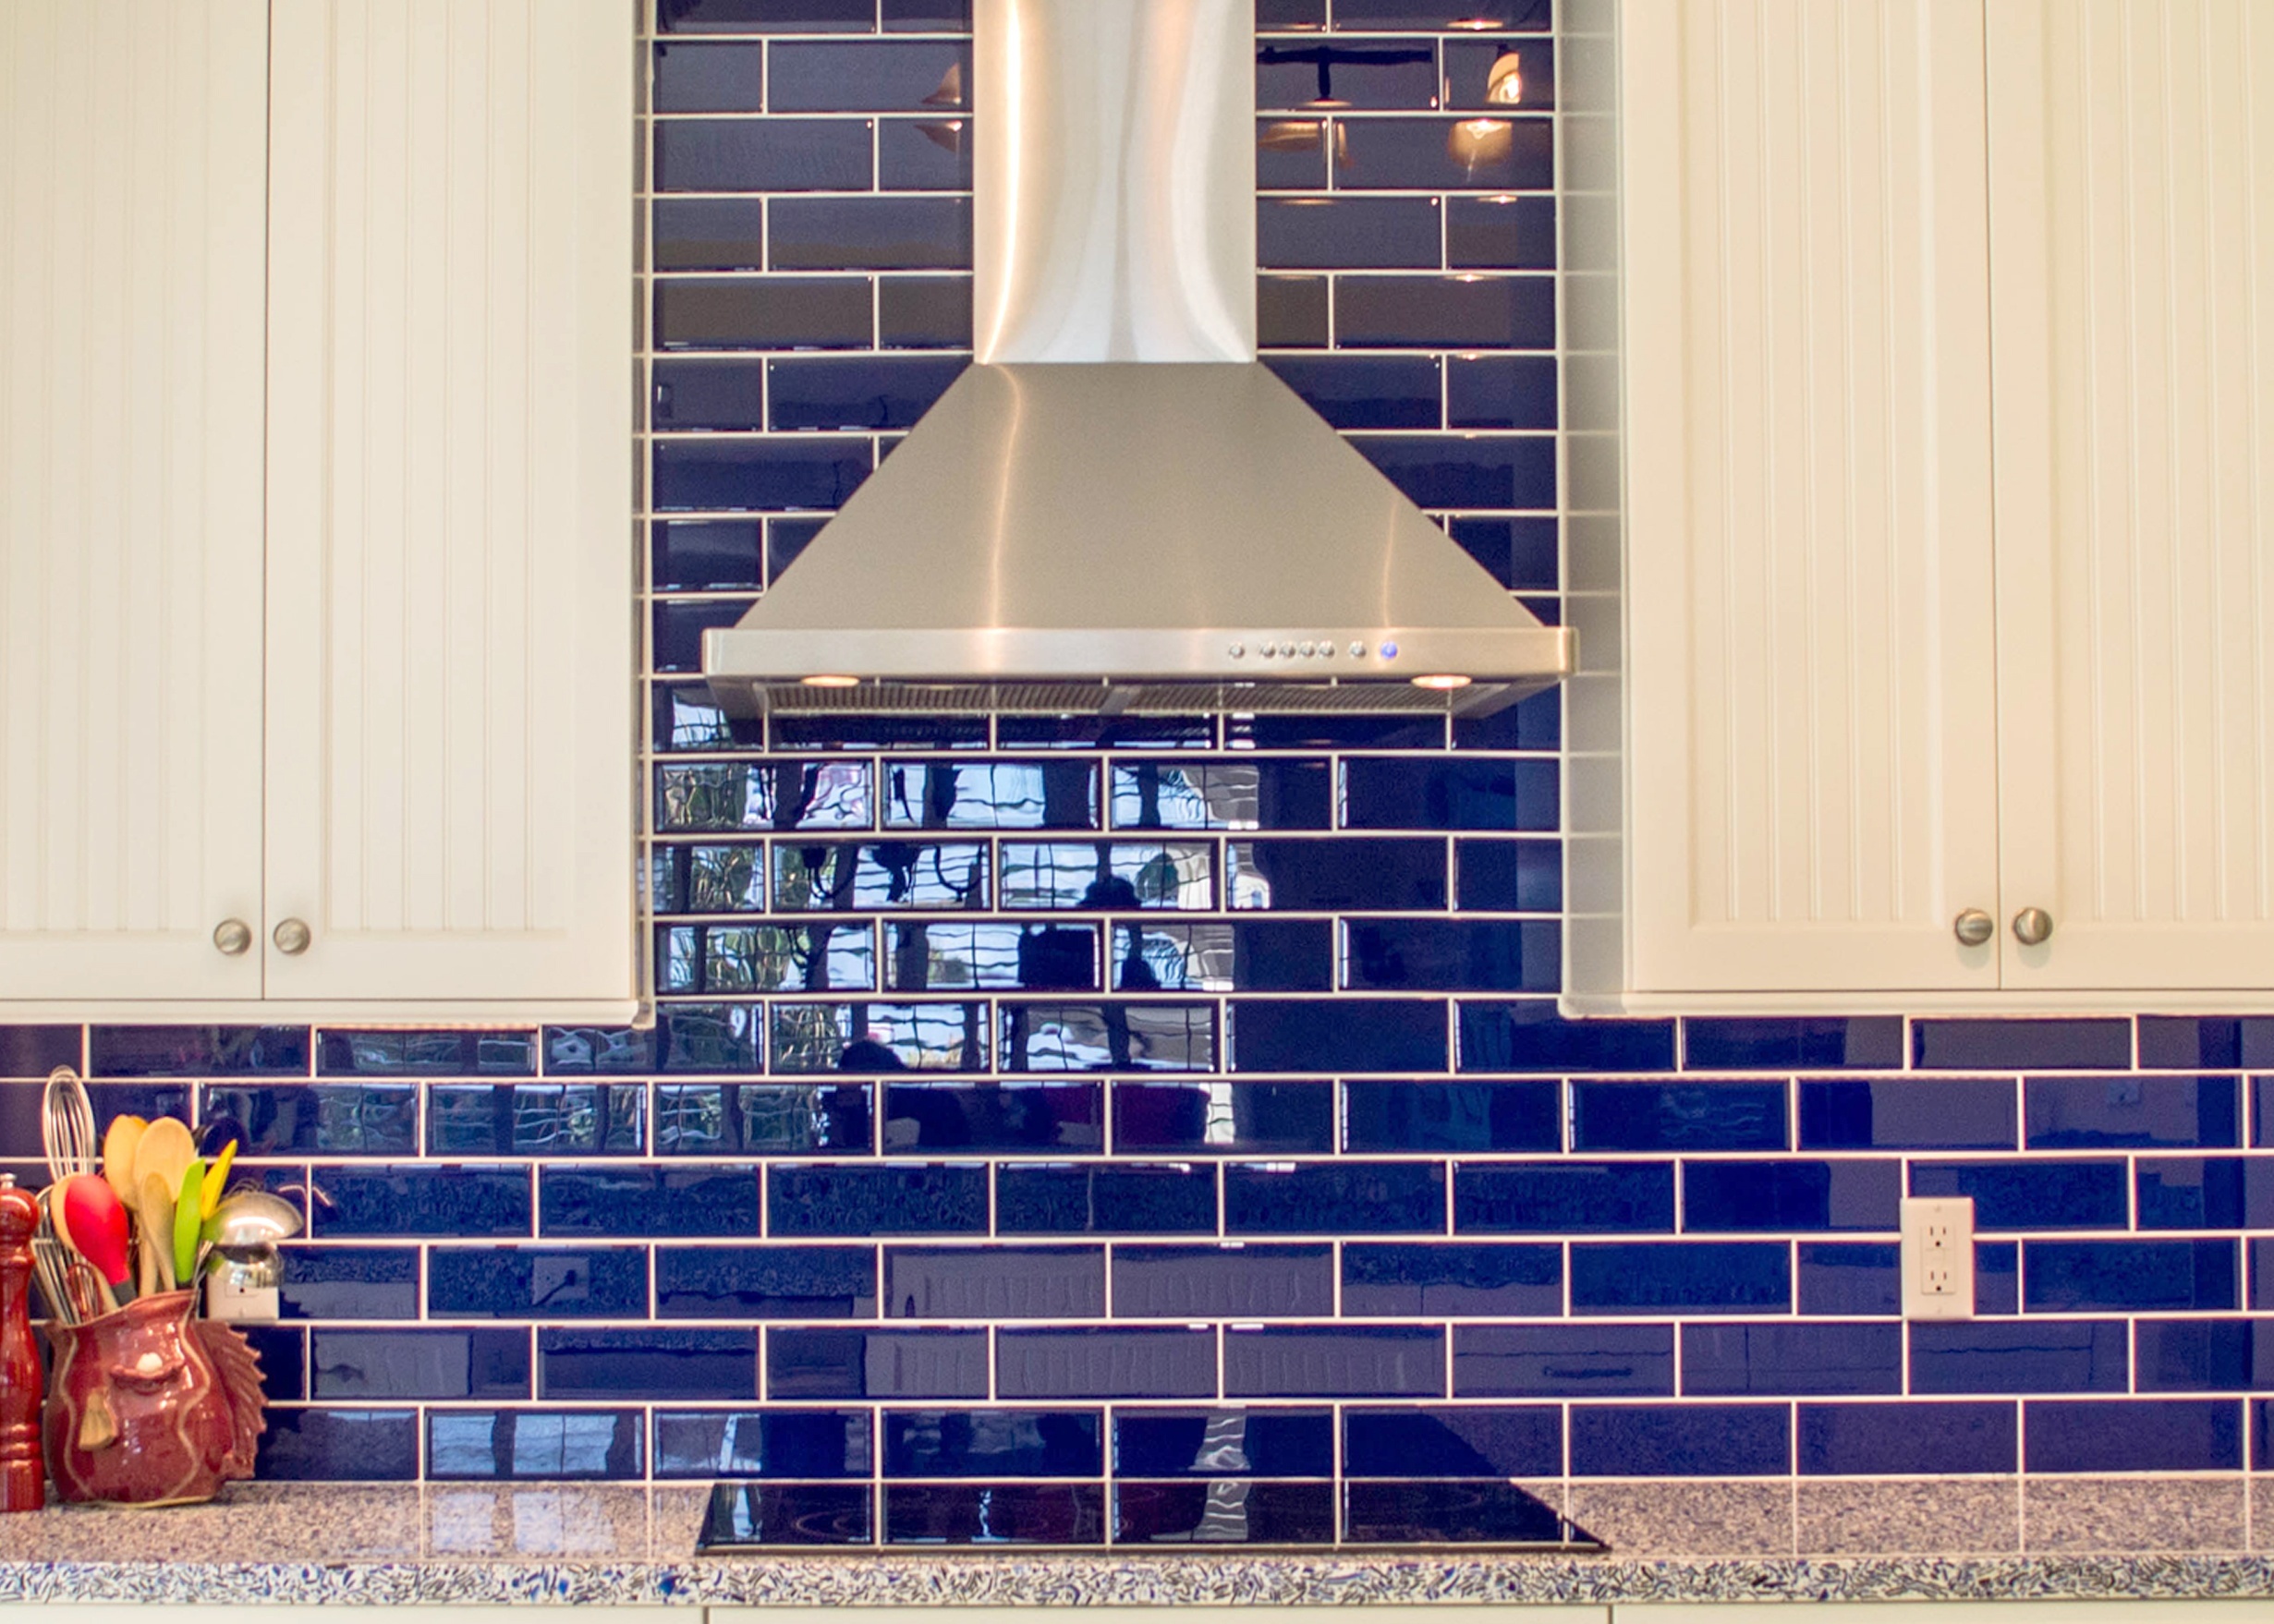 featured_5vetrazzo-recycled-glass-in-cobalt-skye-for-countertops-and-creative-kitchen-storage-by-waterview-kitchens-close-up-of-cobalt-tile